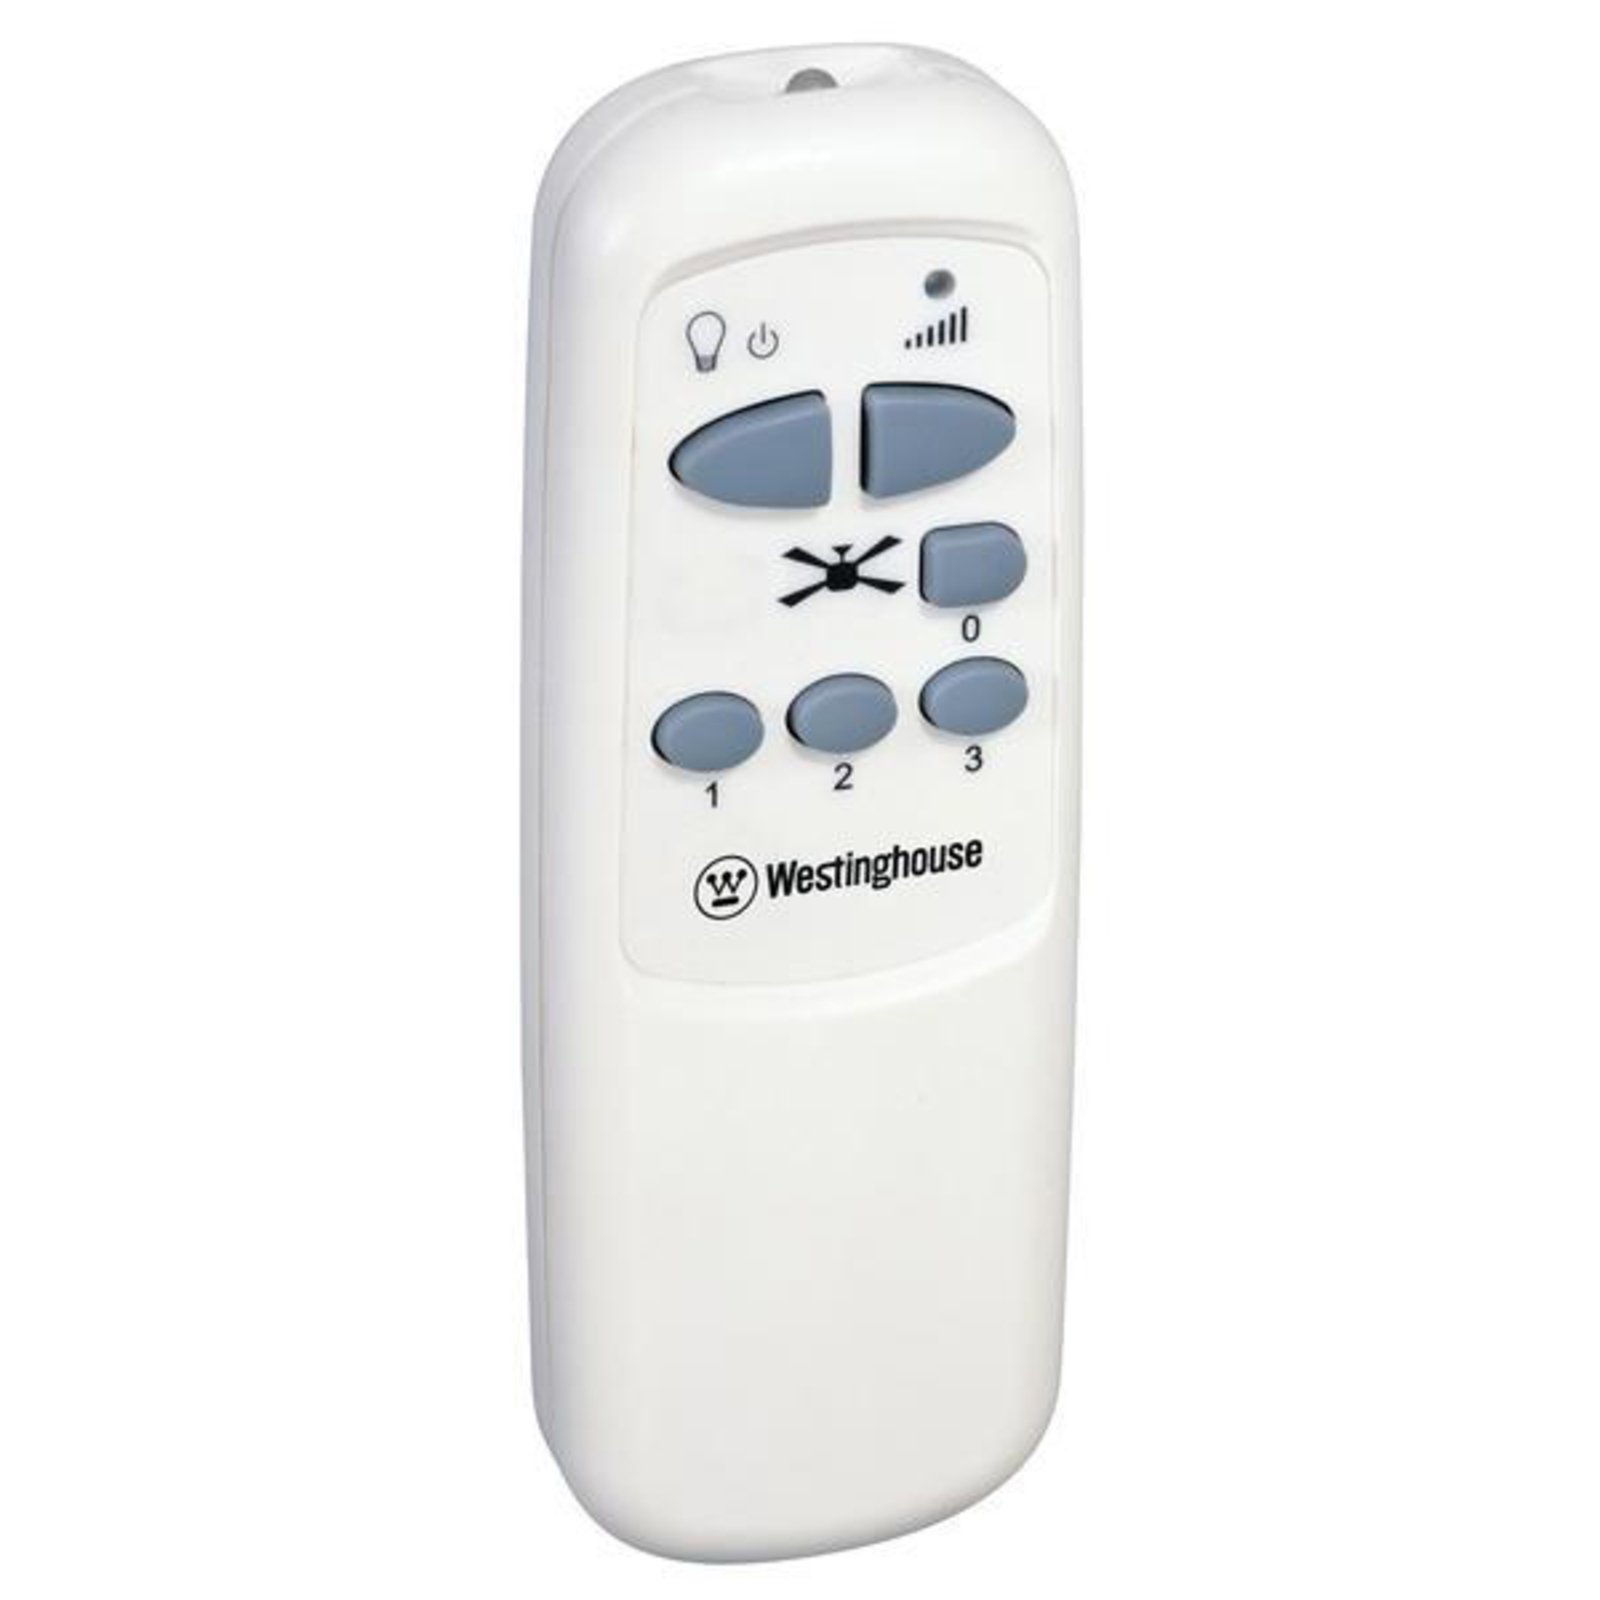 Westinghouse remote control for fans, white